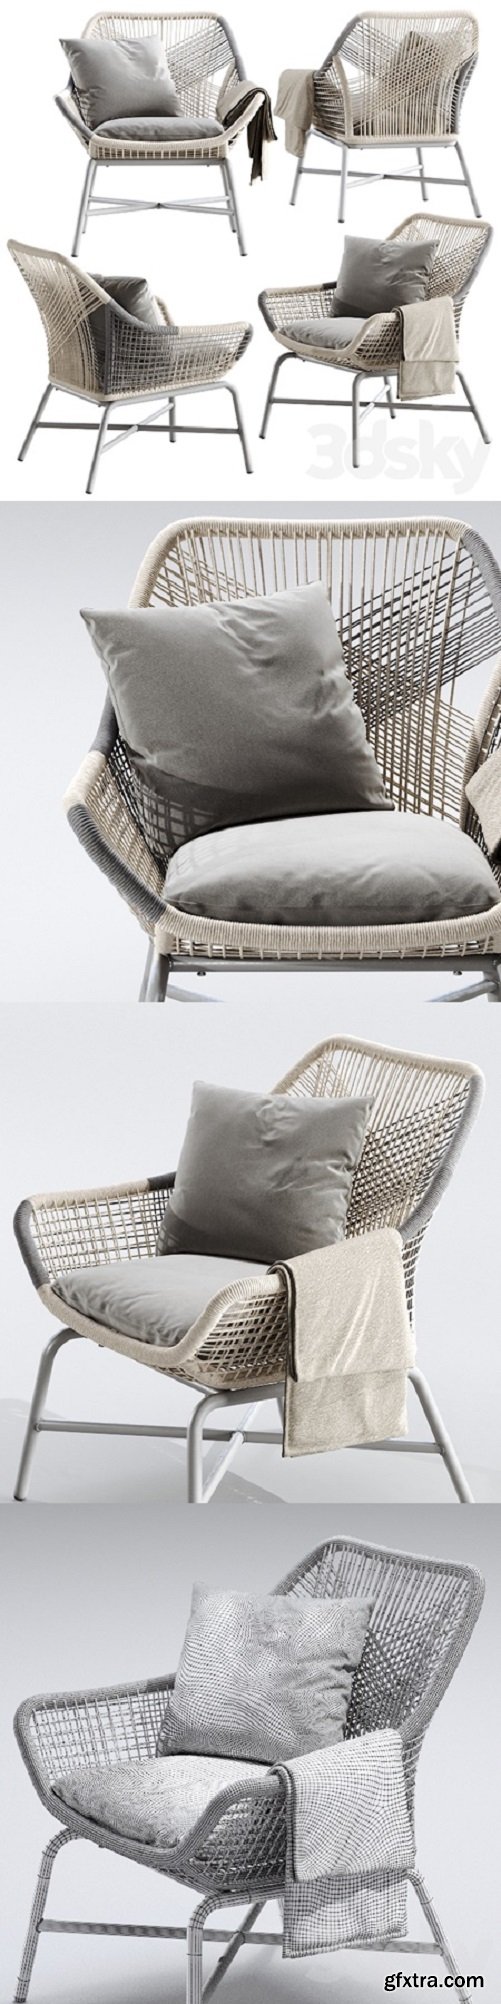 Westelm Huron Outdoor Small Lounge Chair